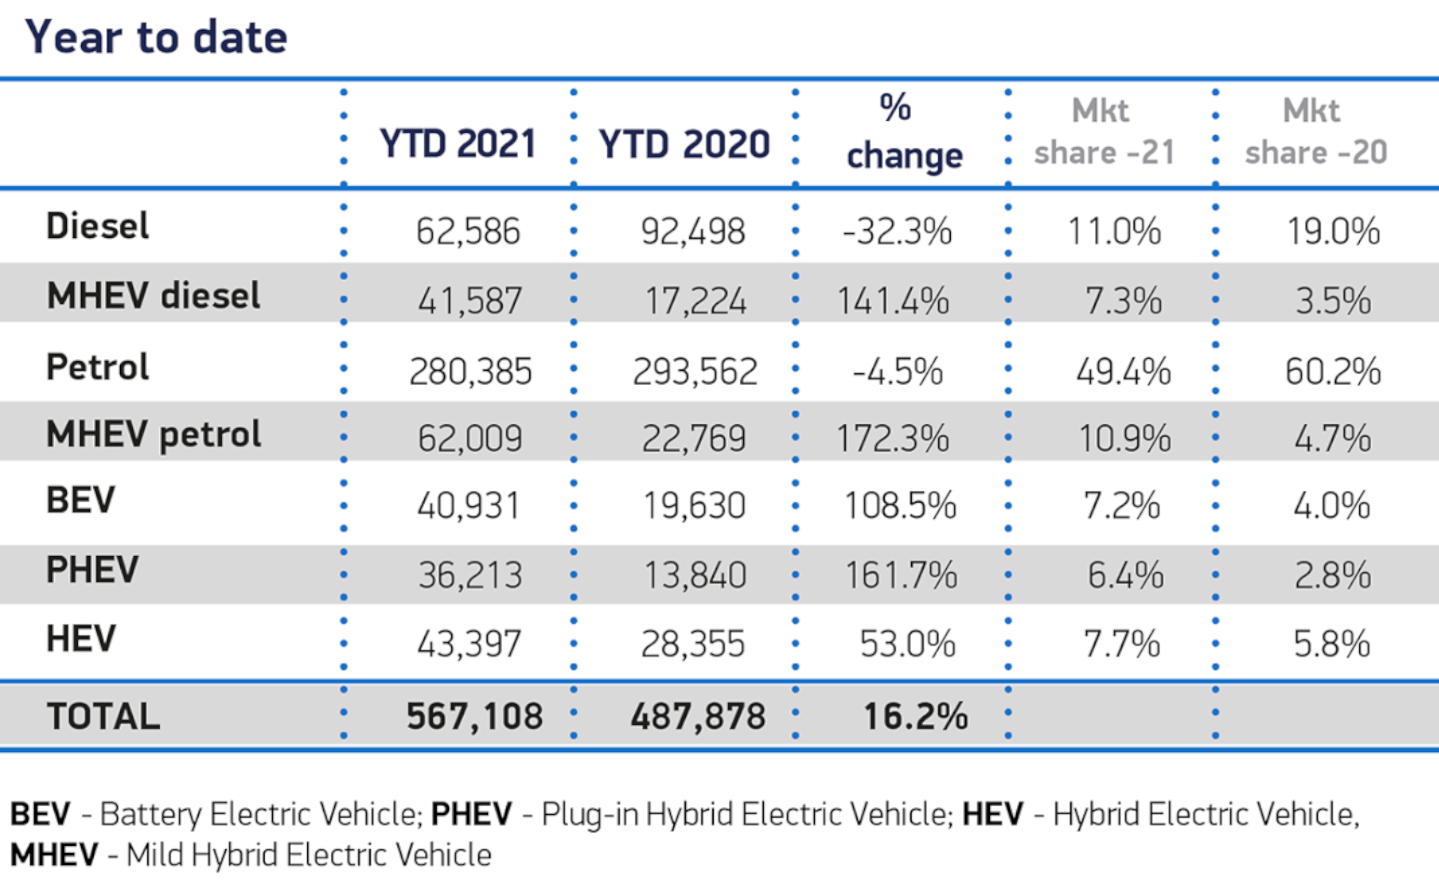 Uptake of pure-electric cars affected by reduction in government grant